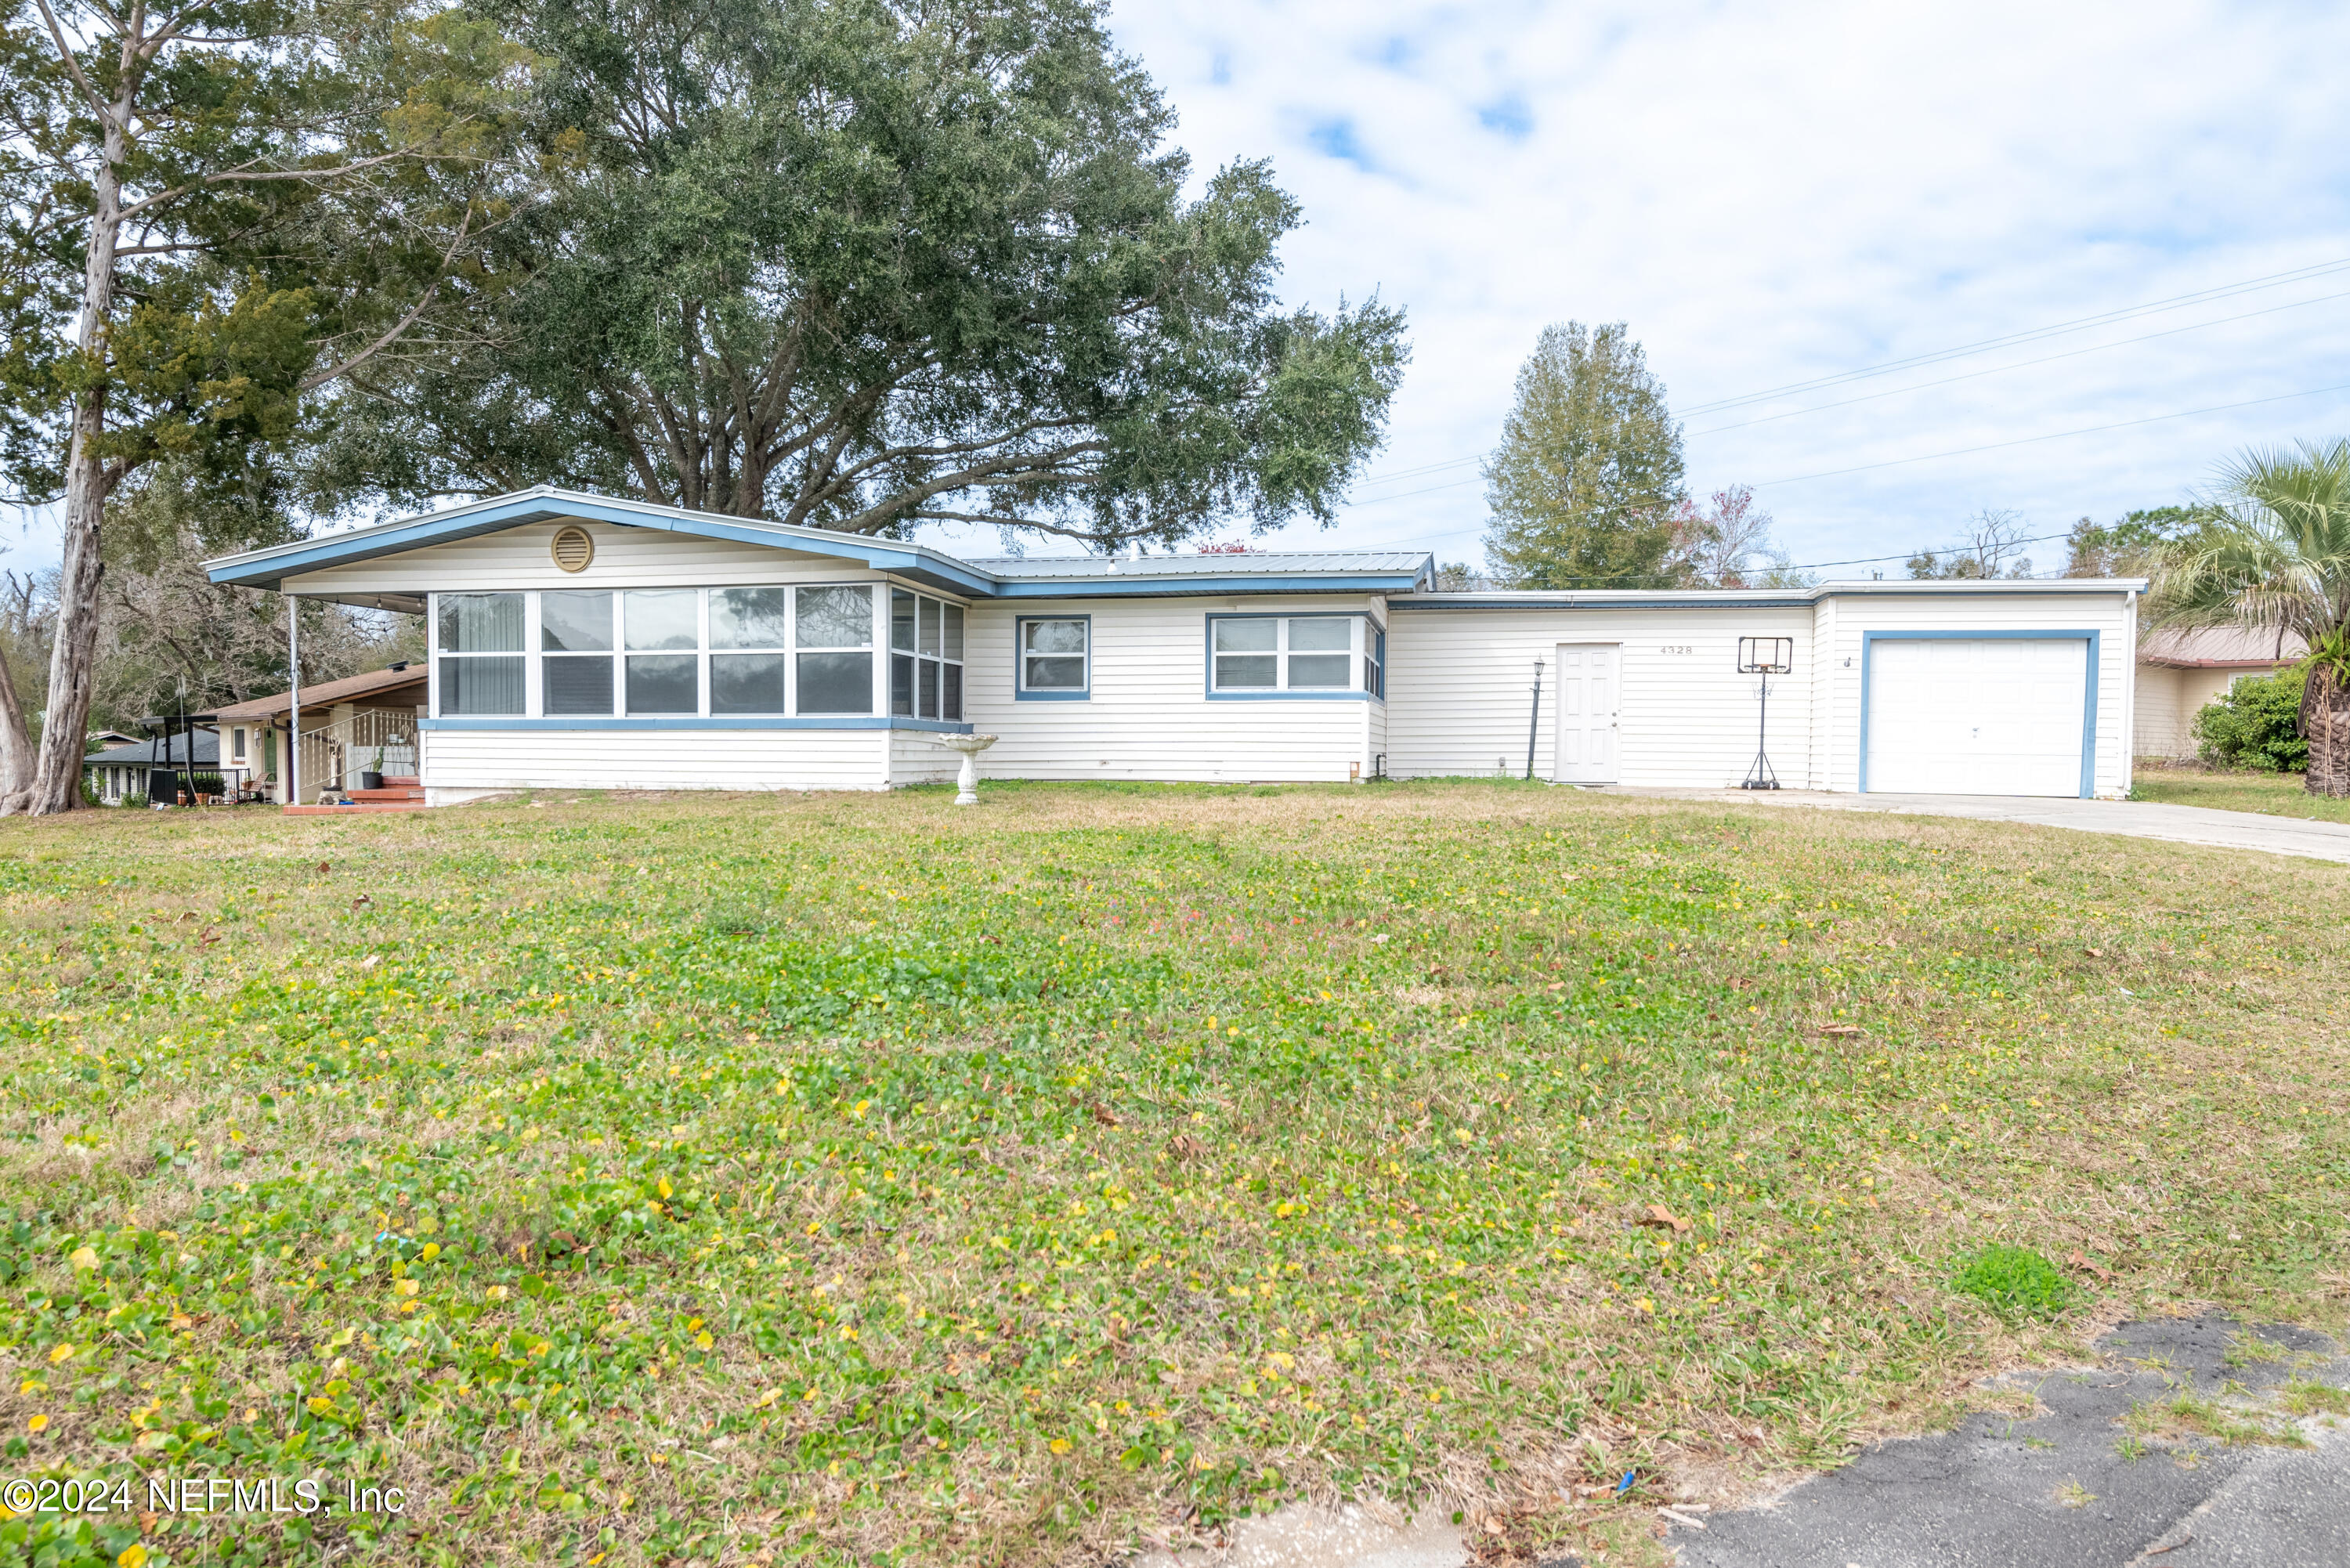 Keystone Heights, FL home for sale located at 4328 SE 2ND Avenue, Keystone Heights, FL 32656